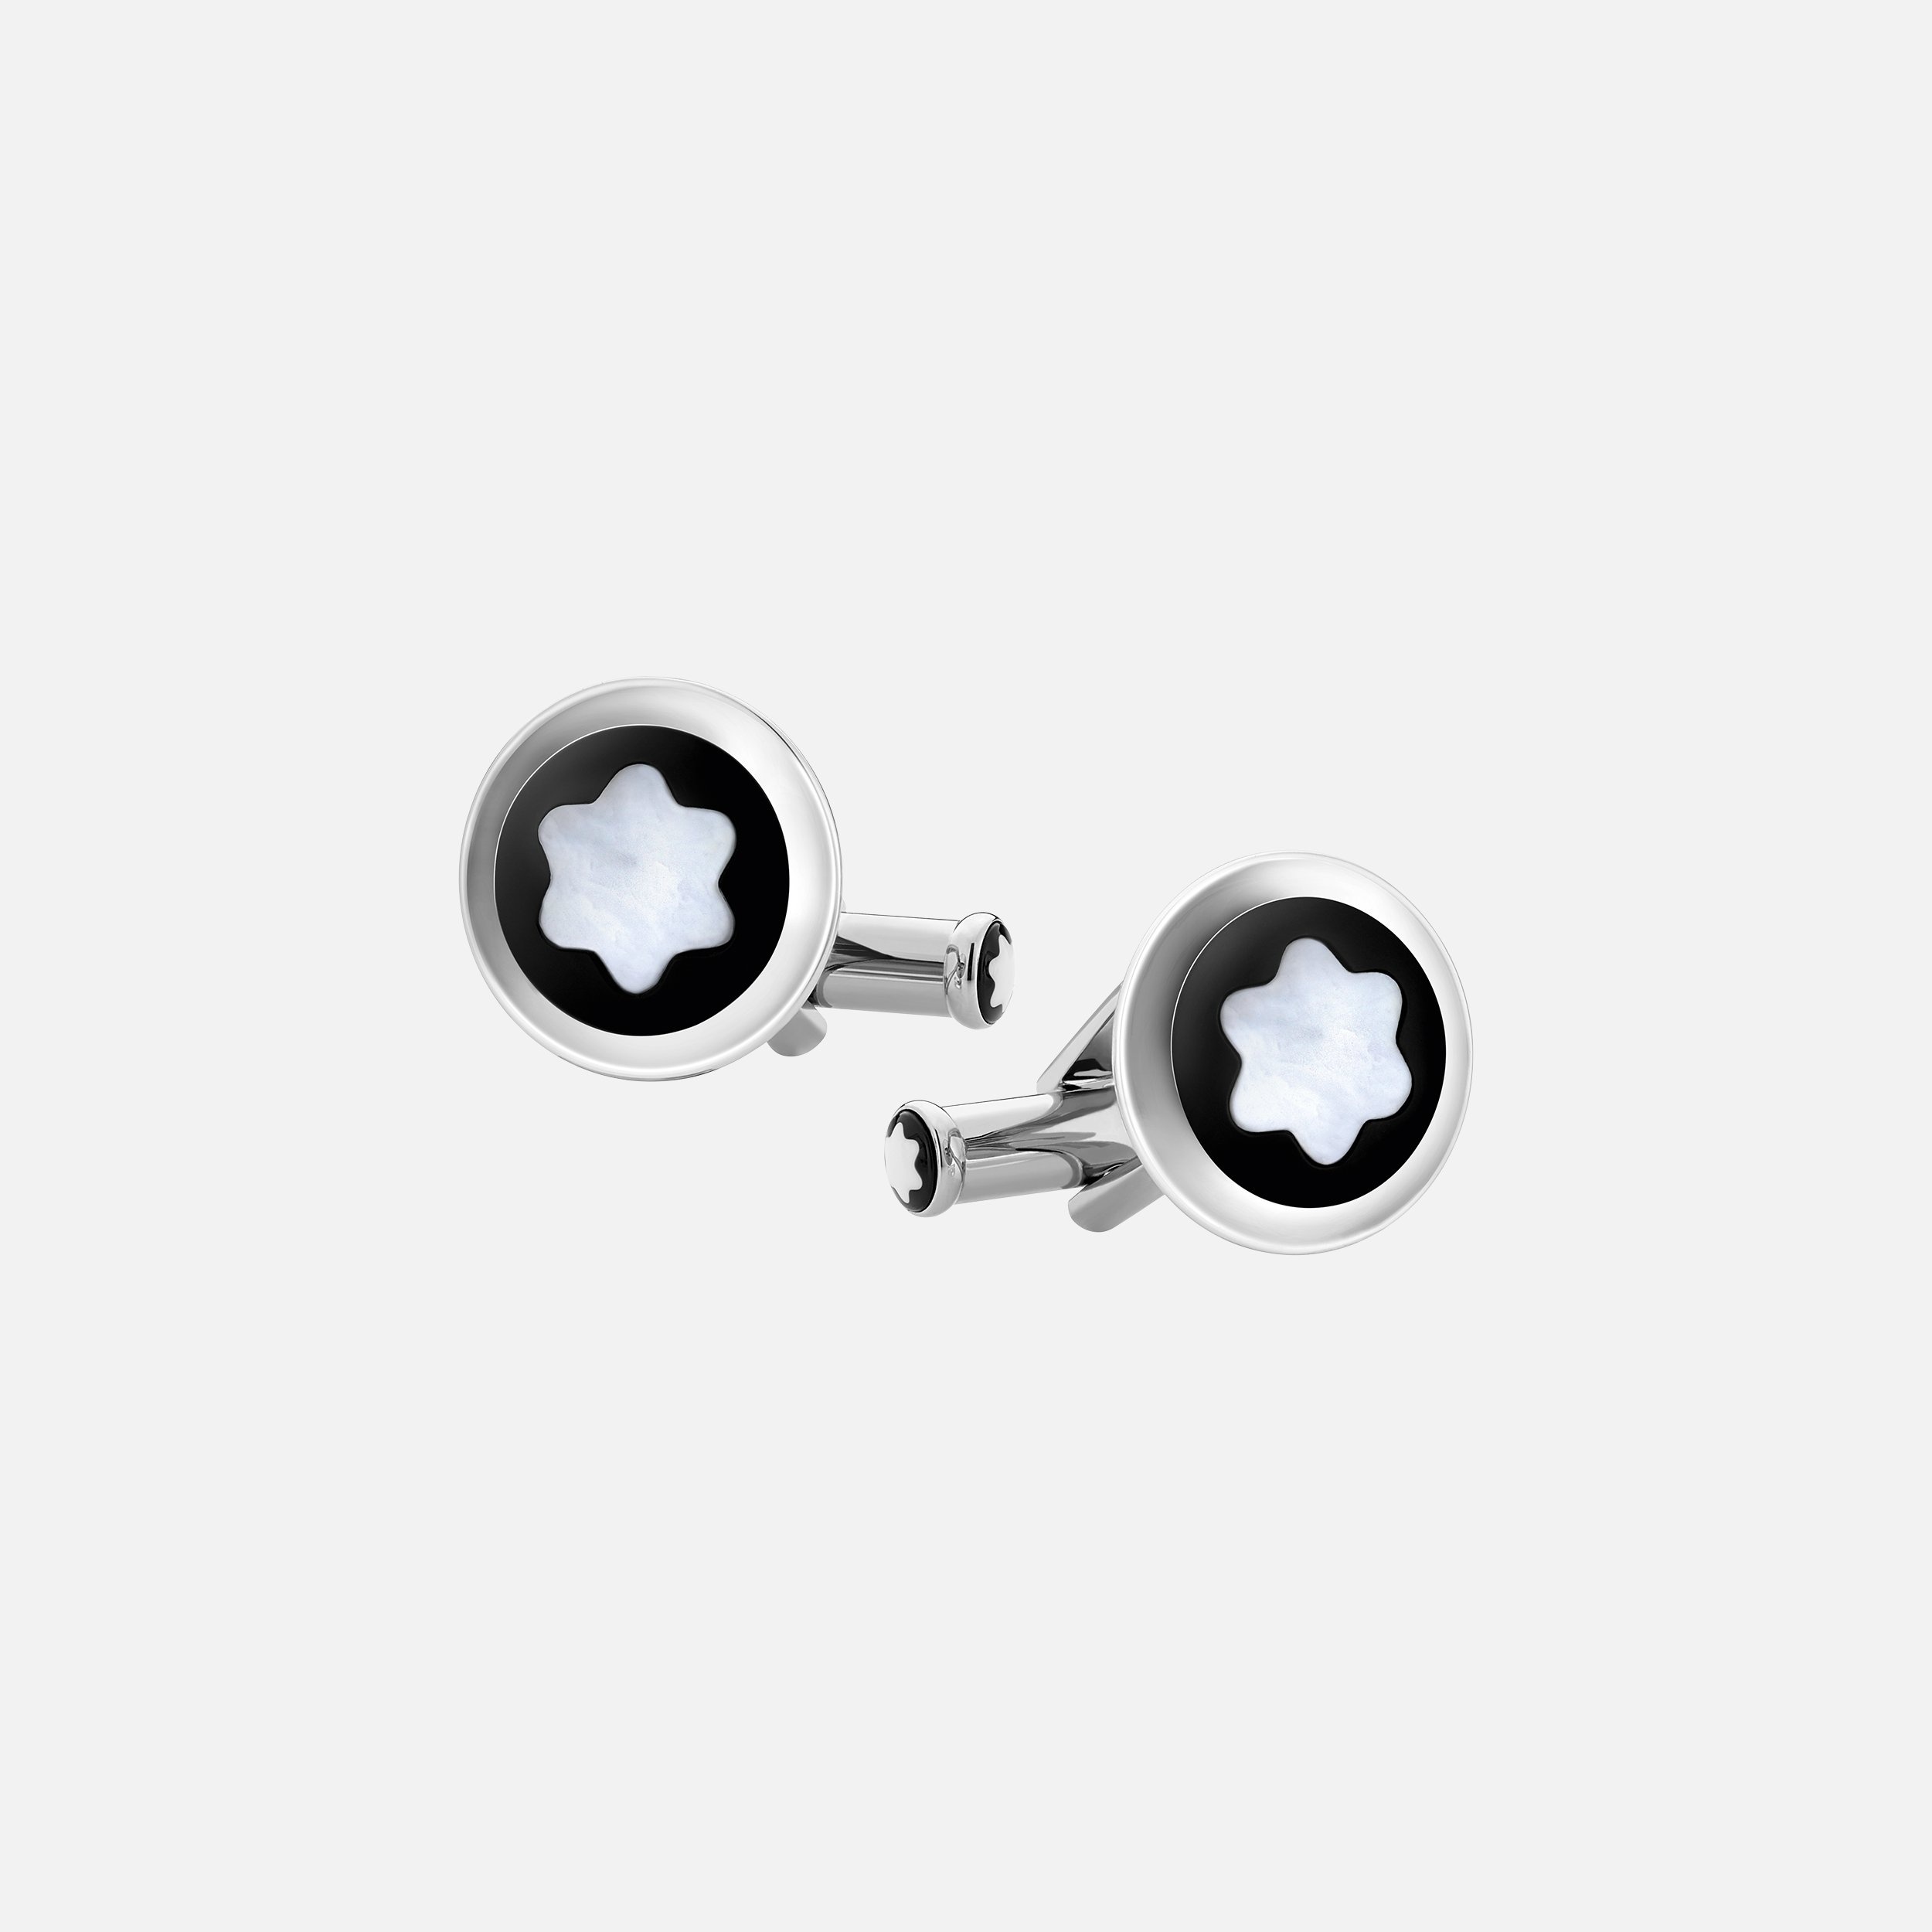 Cufflinks, round in stainless steel with black PVD inlay and mother-of-pearl snowcap emblem - 1